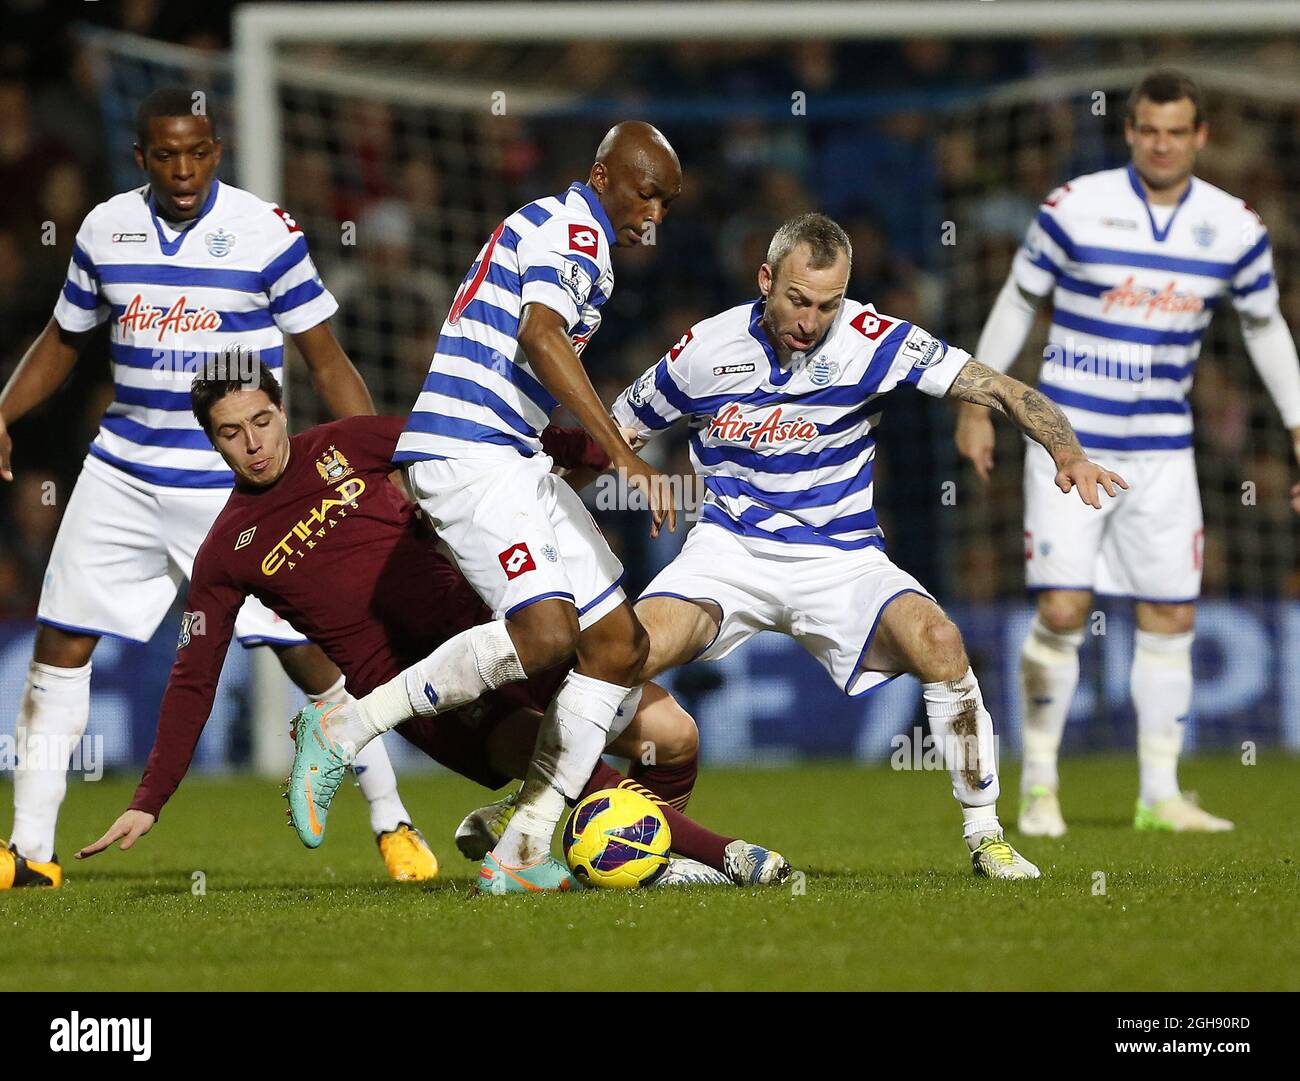 QPR's Stephane Mbia and Shaun Derry tussle with Manchester City's Samir Nasri during the Barclays Premier League between QPR and Manchester City at the Loftus Road in London on January 29, 2013. Stock Photo